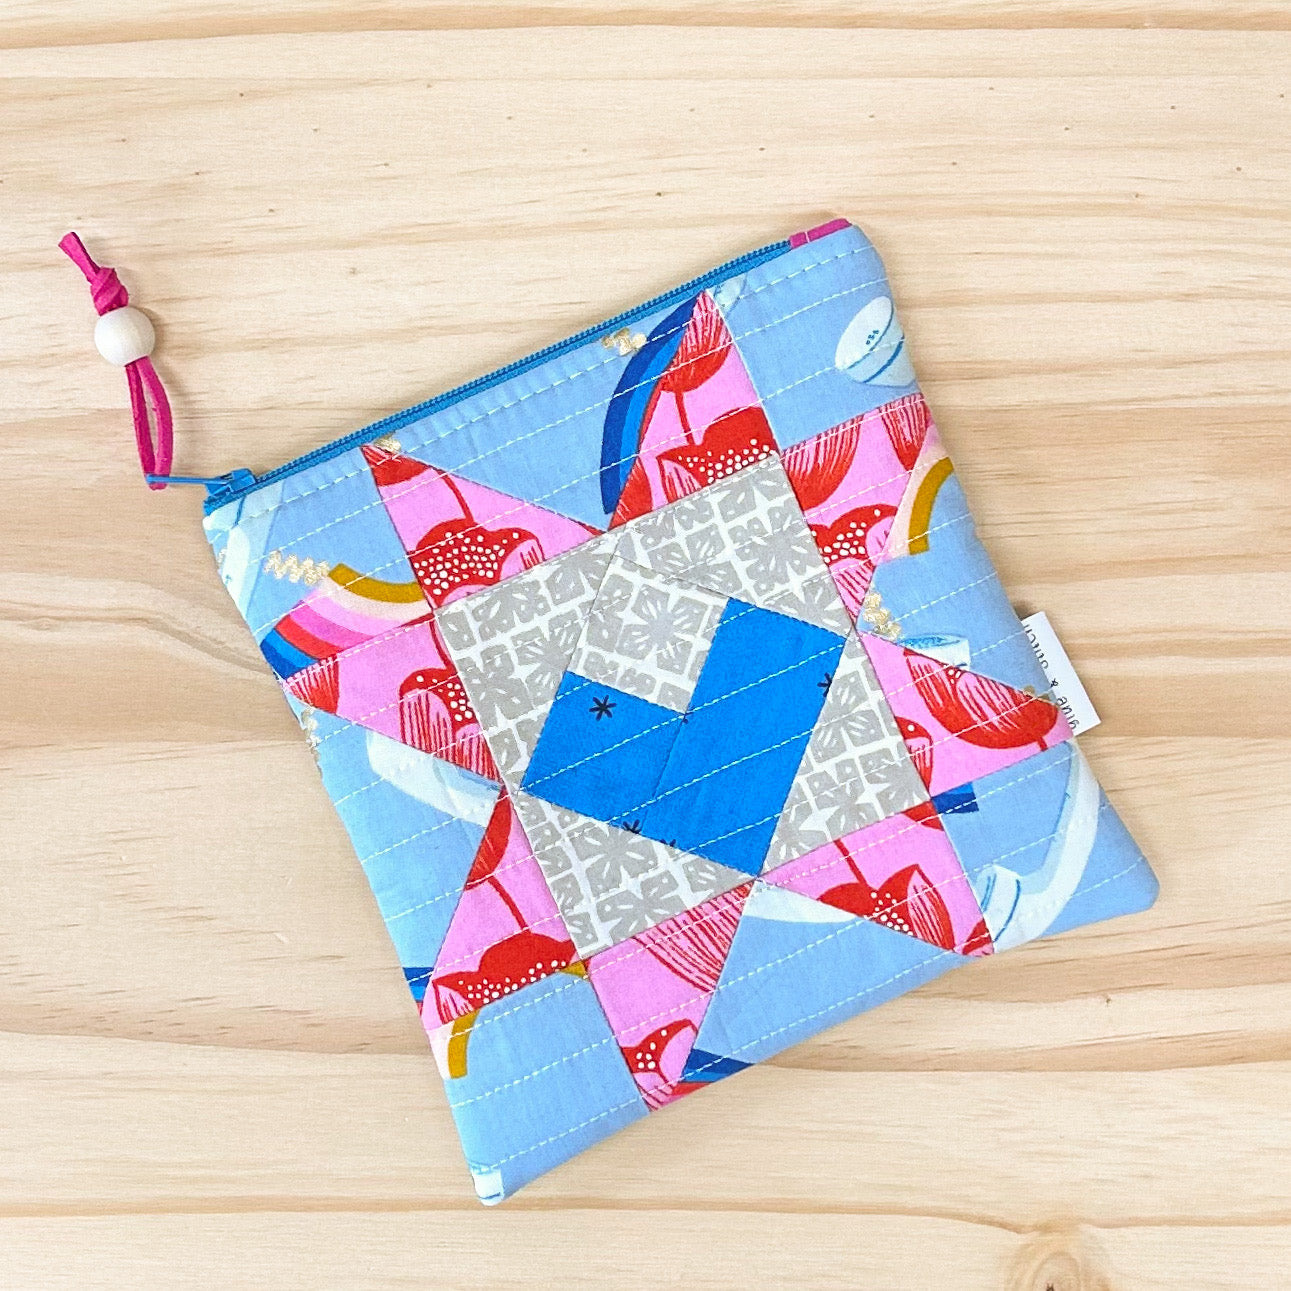 Quilted Heart and Star Pouch